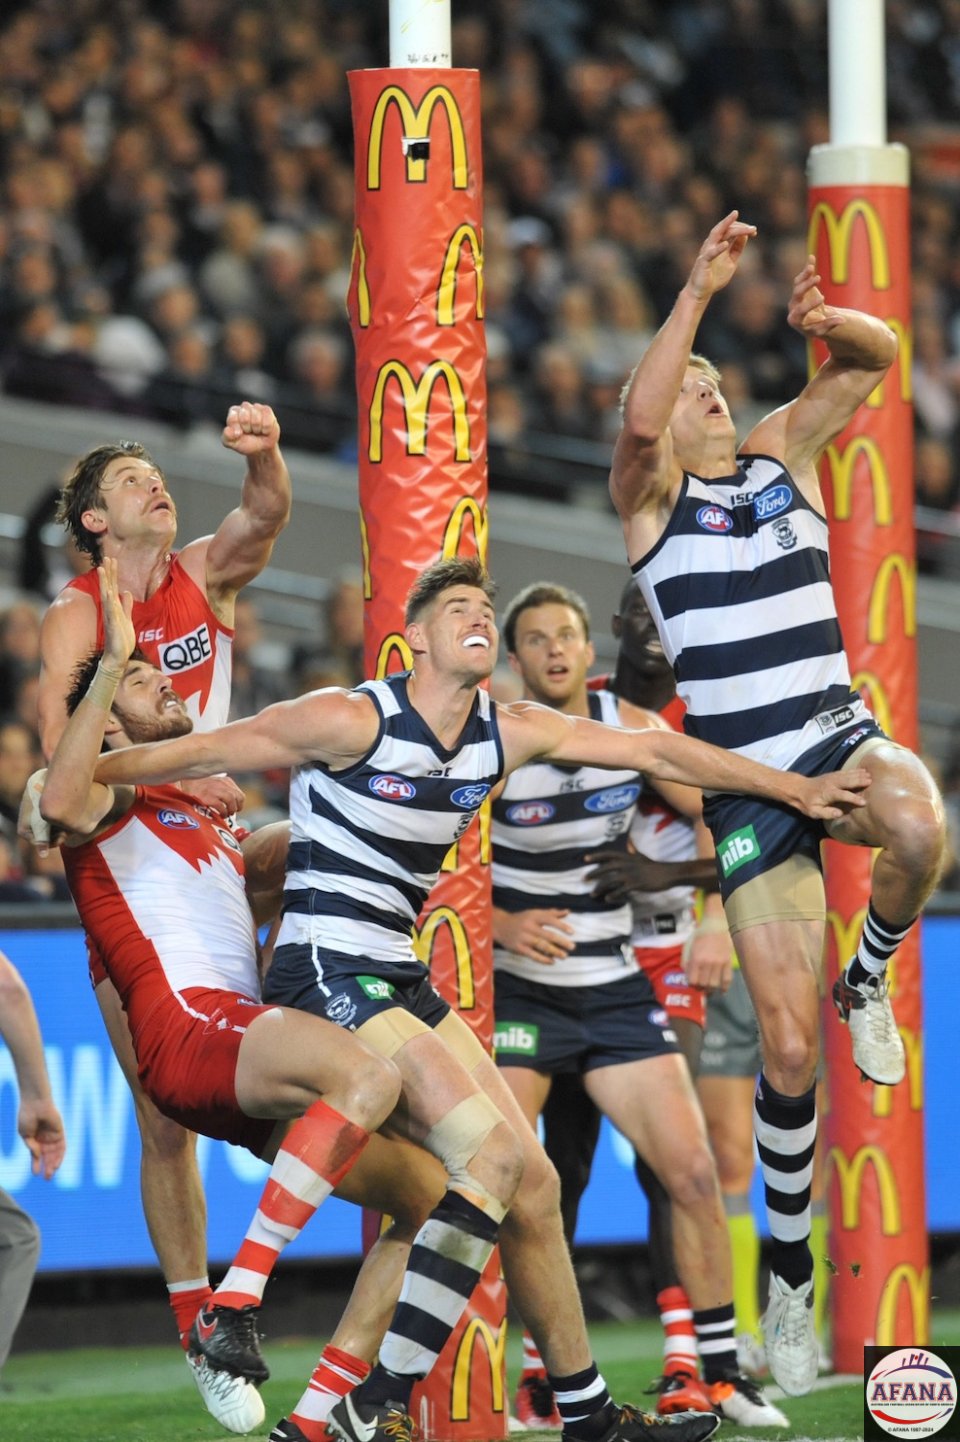 Big pack ready to launch as Geelong bomb the ball in